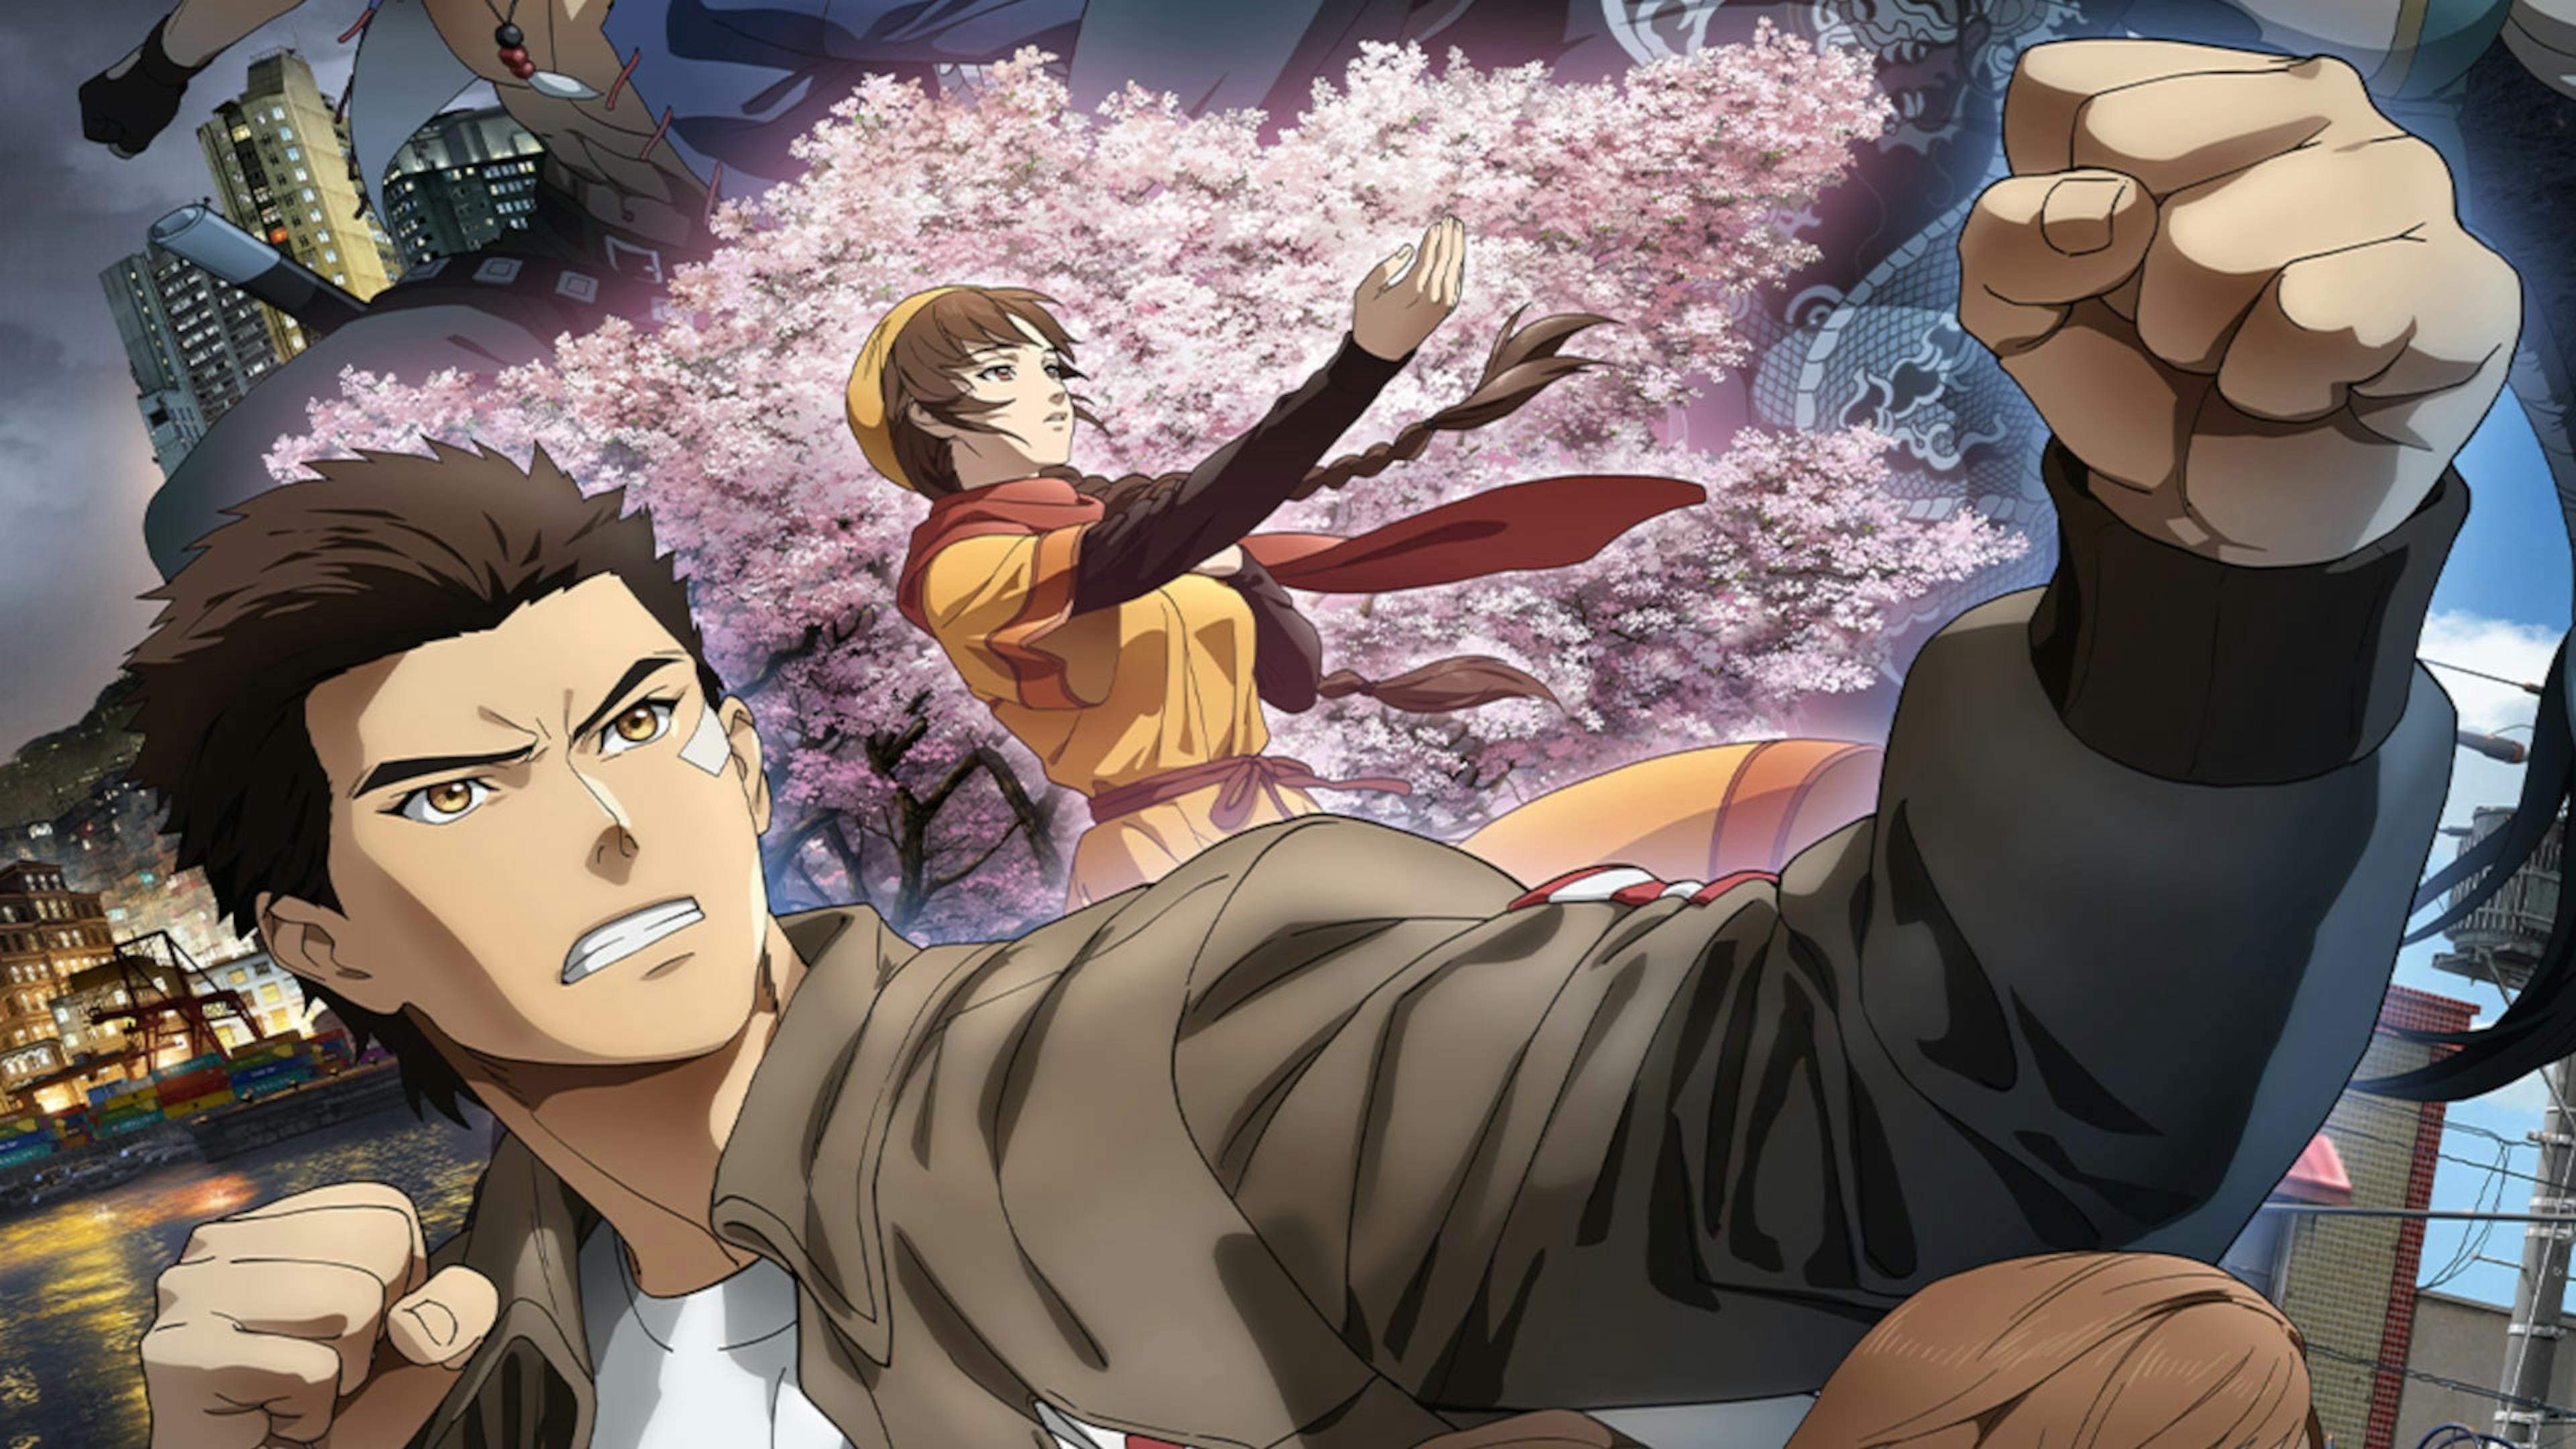 Two characters in fighting poses stand in front of a cherry blossom tree and harborfront